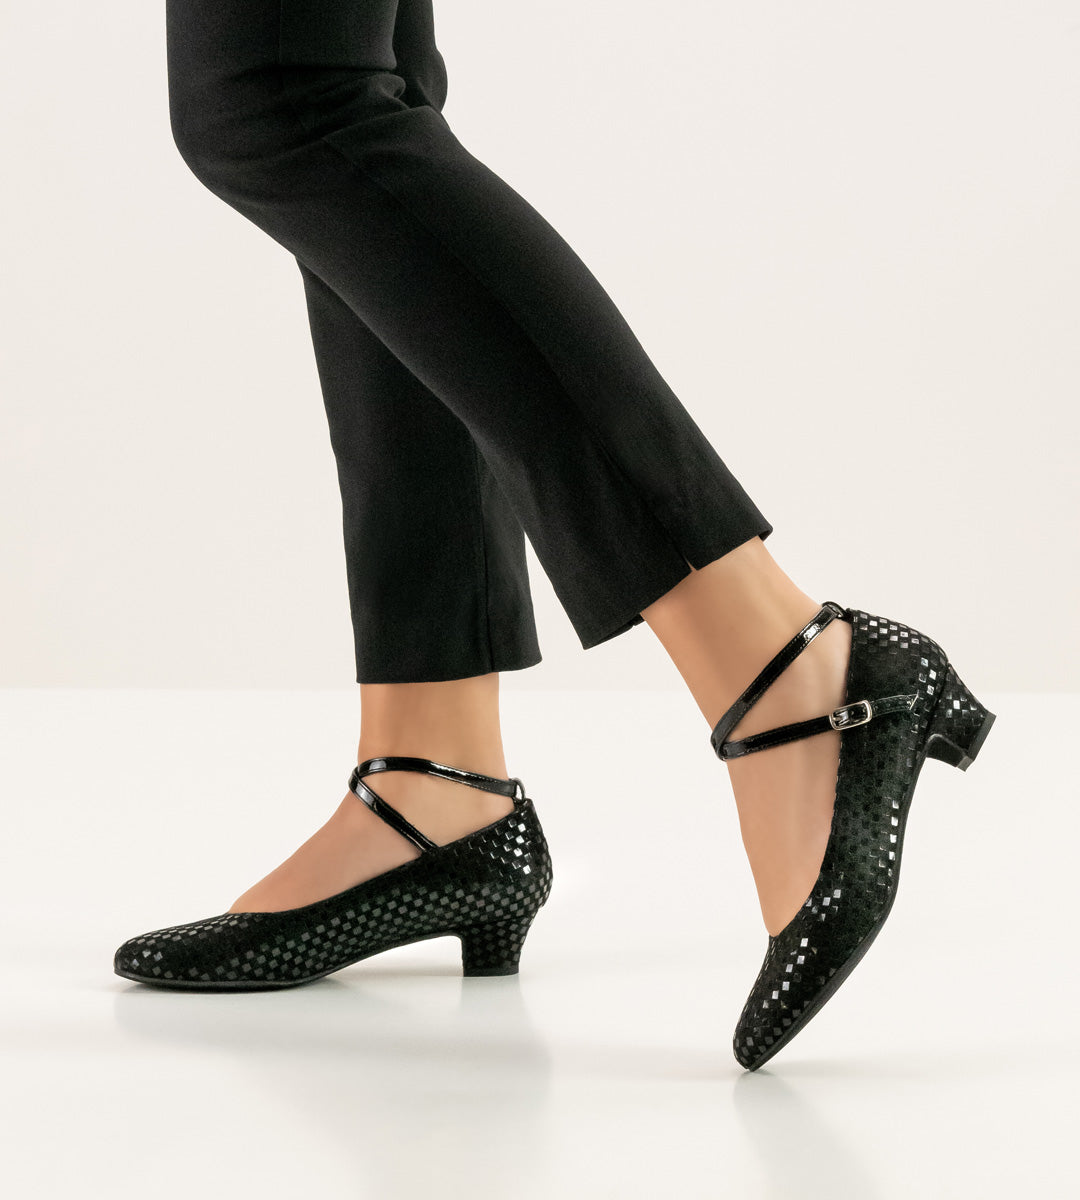 Werner Kern Alice Ladies Ballroom Shoes in Checkered Black Suede Leather with Criss Cross Strap